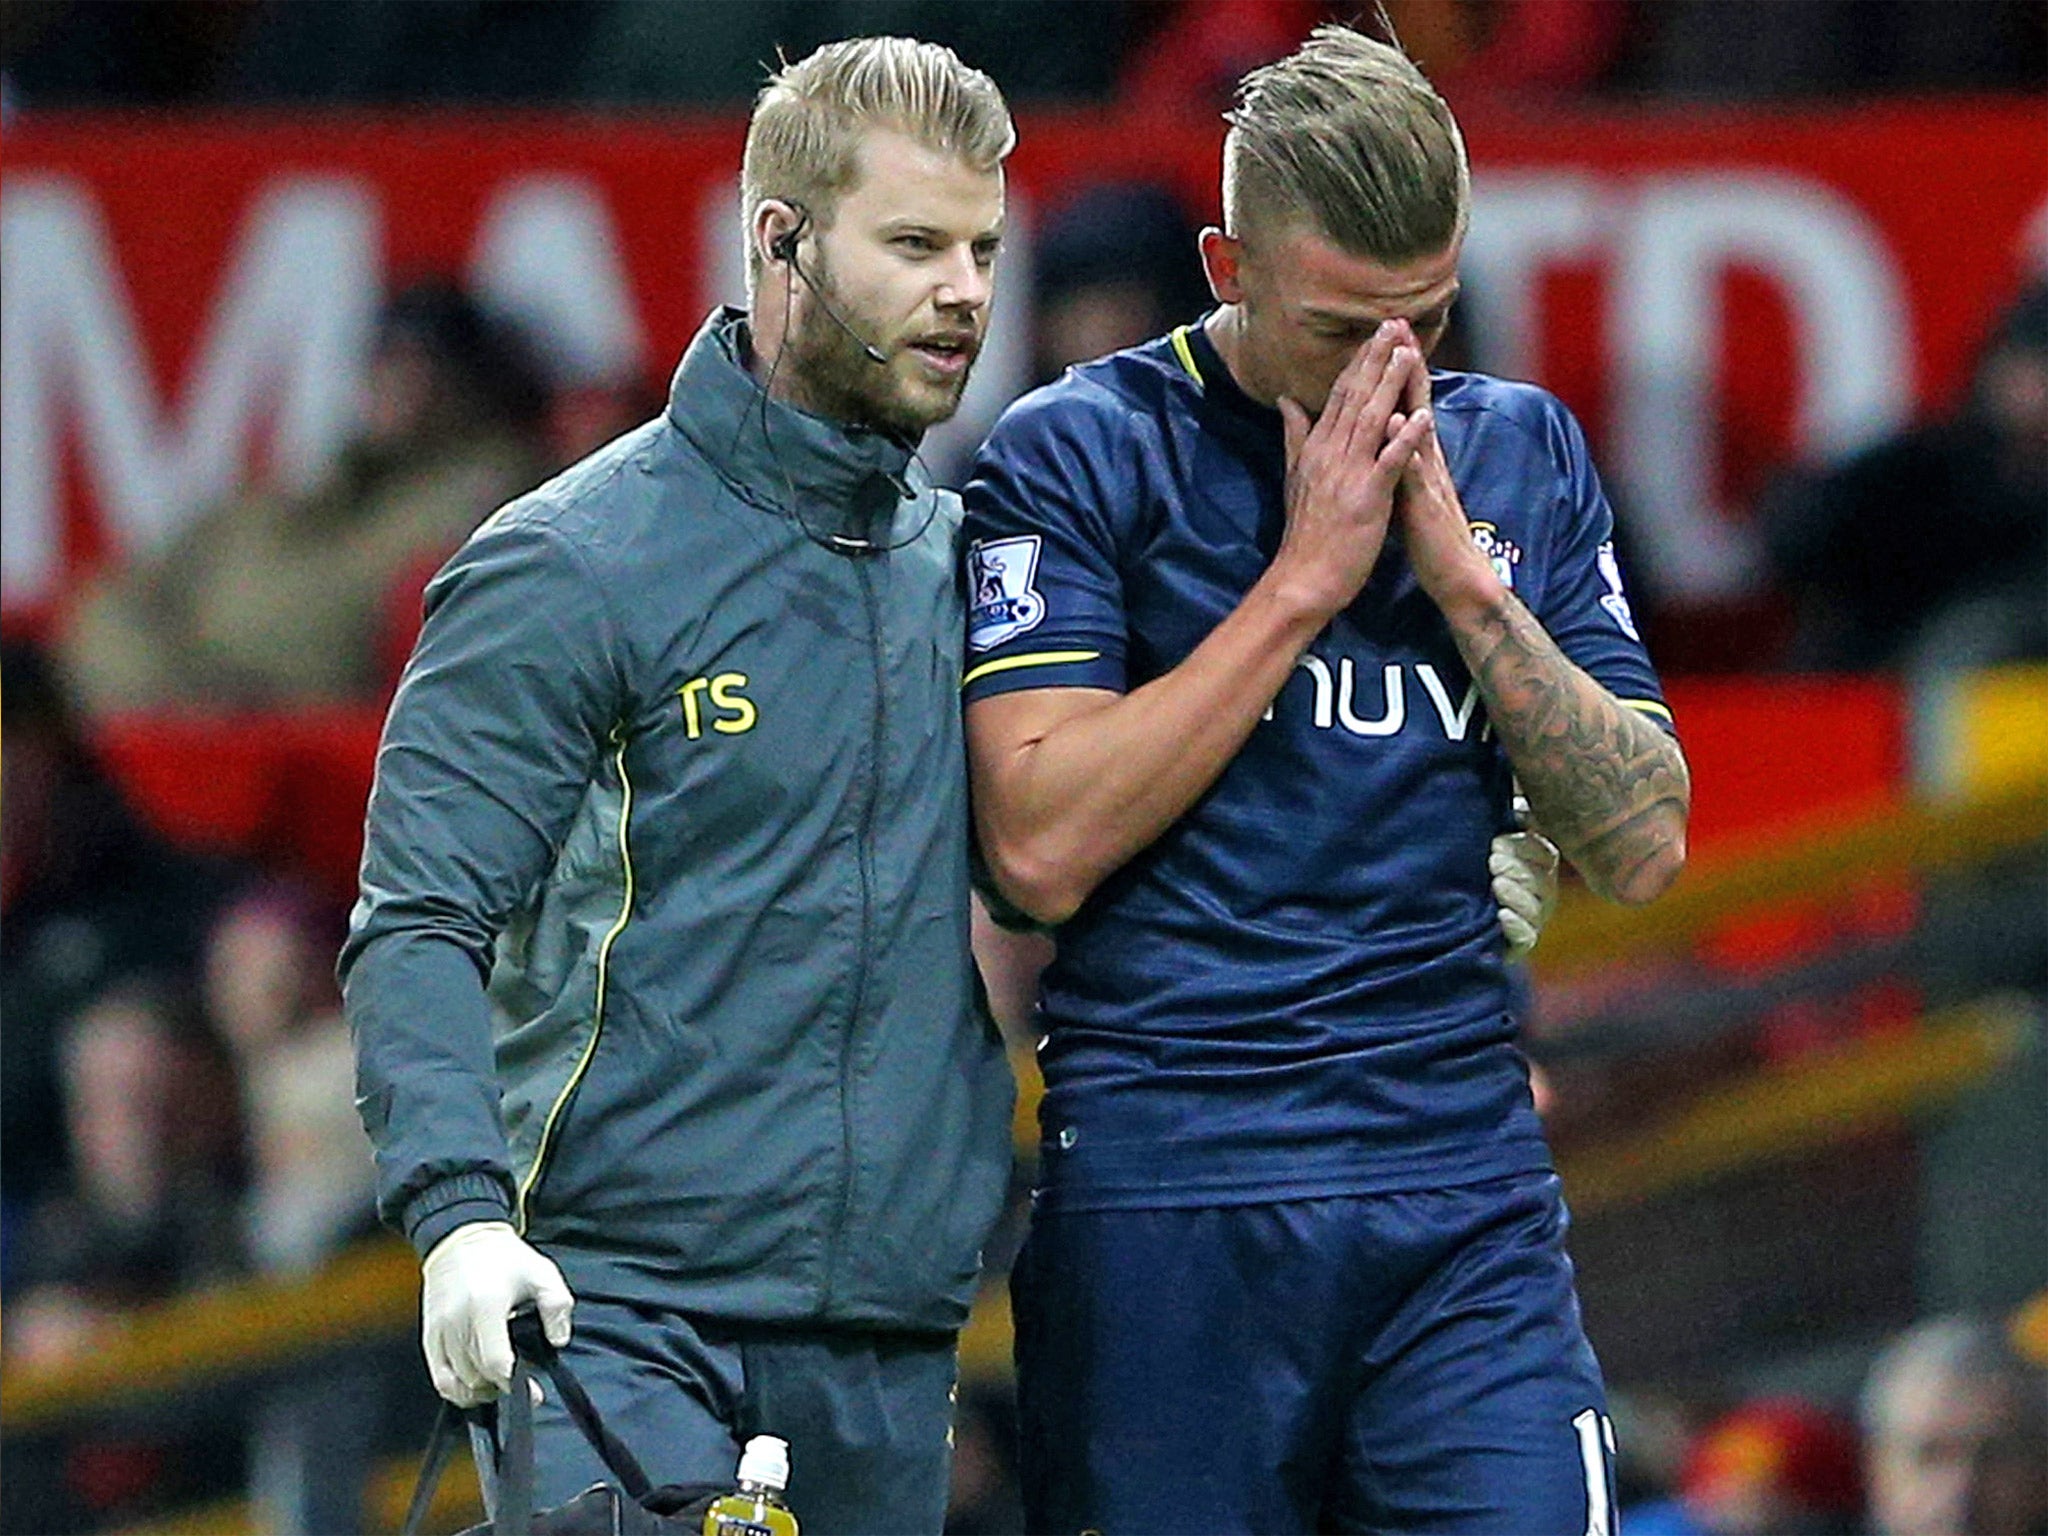 Defender Toby Alderweireld will miss up to four weeks with hamstring strain picked up during last weekend's victory at Old Trafford